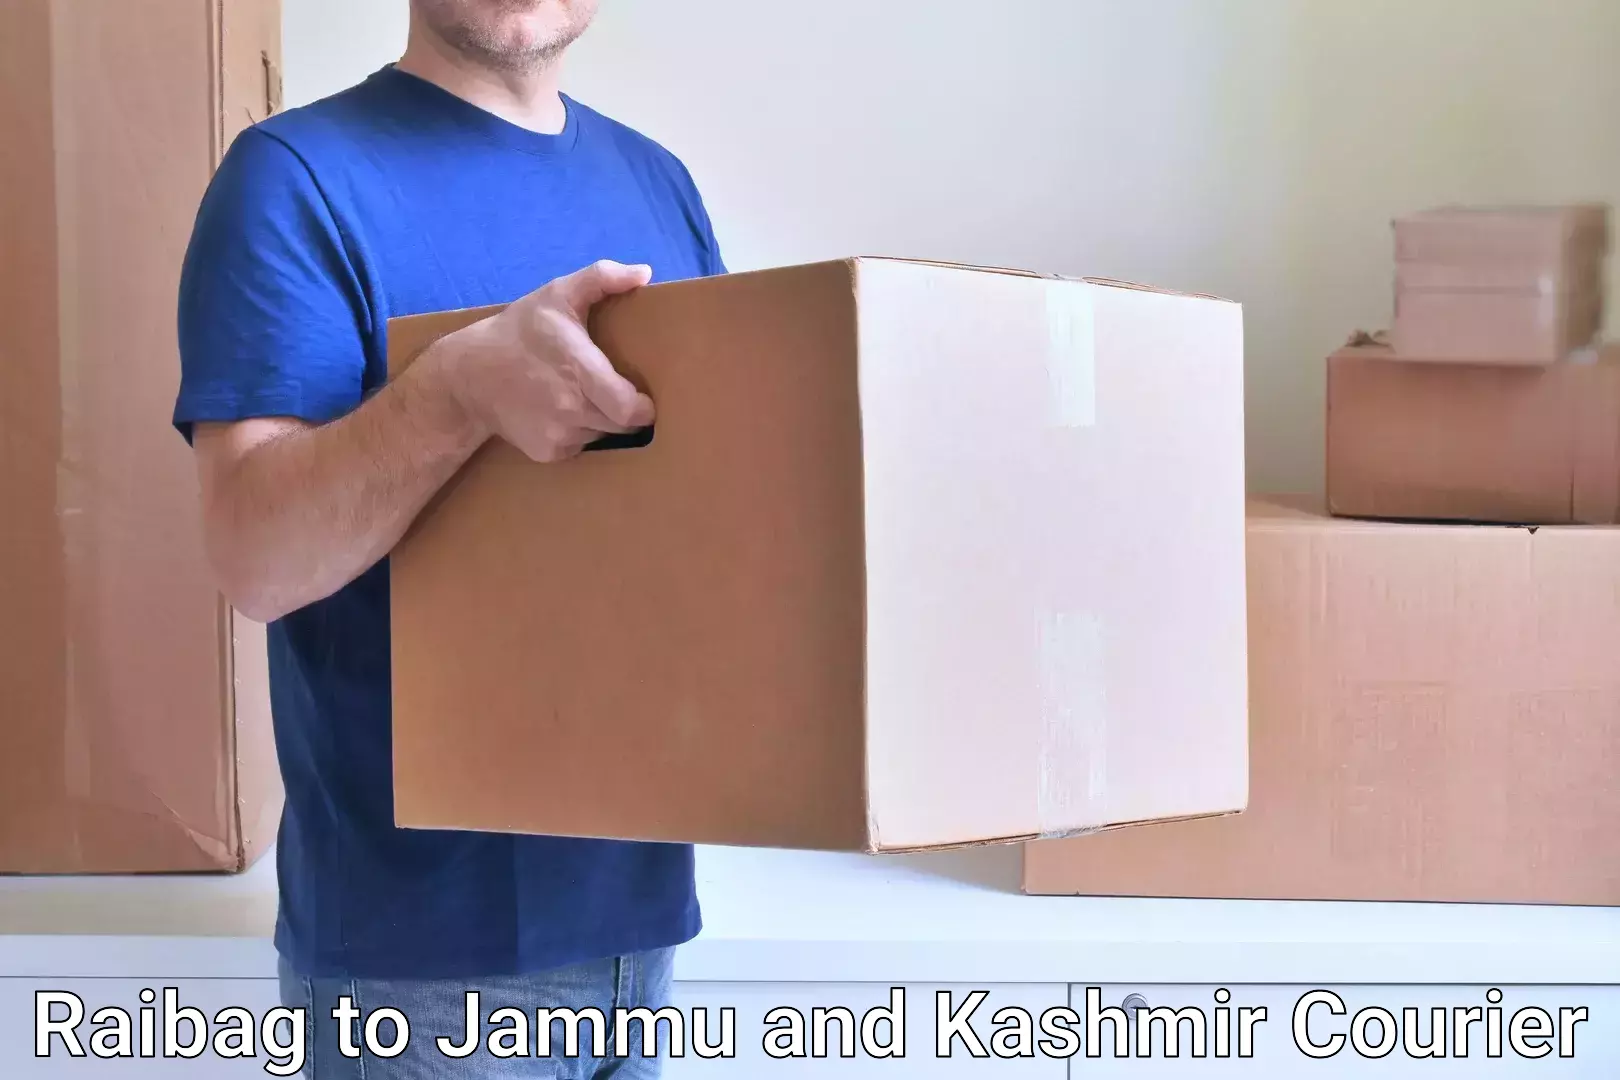 Automated parcel services Raibag to Jammu and Kashmir